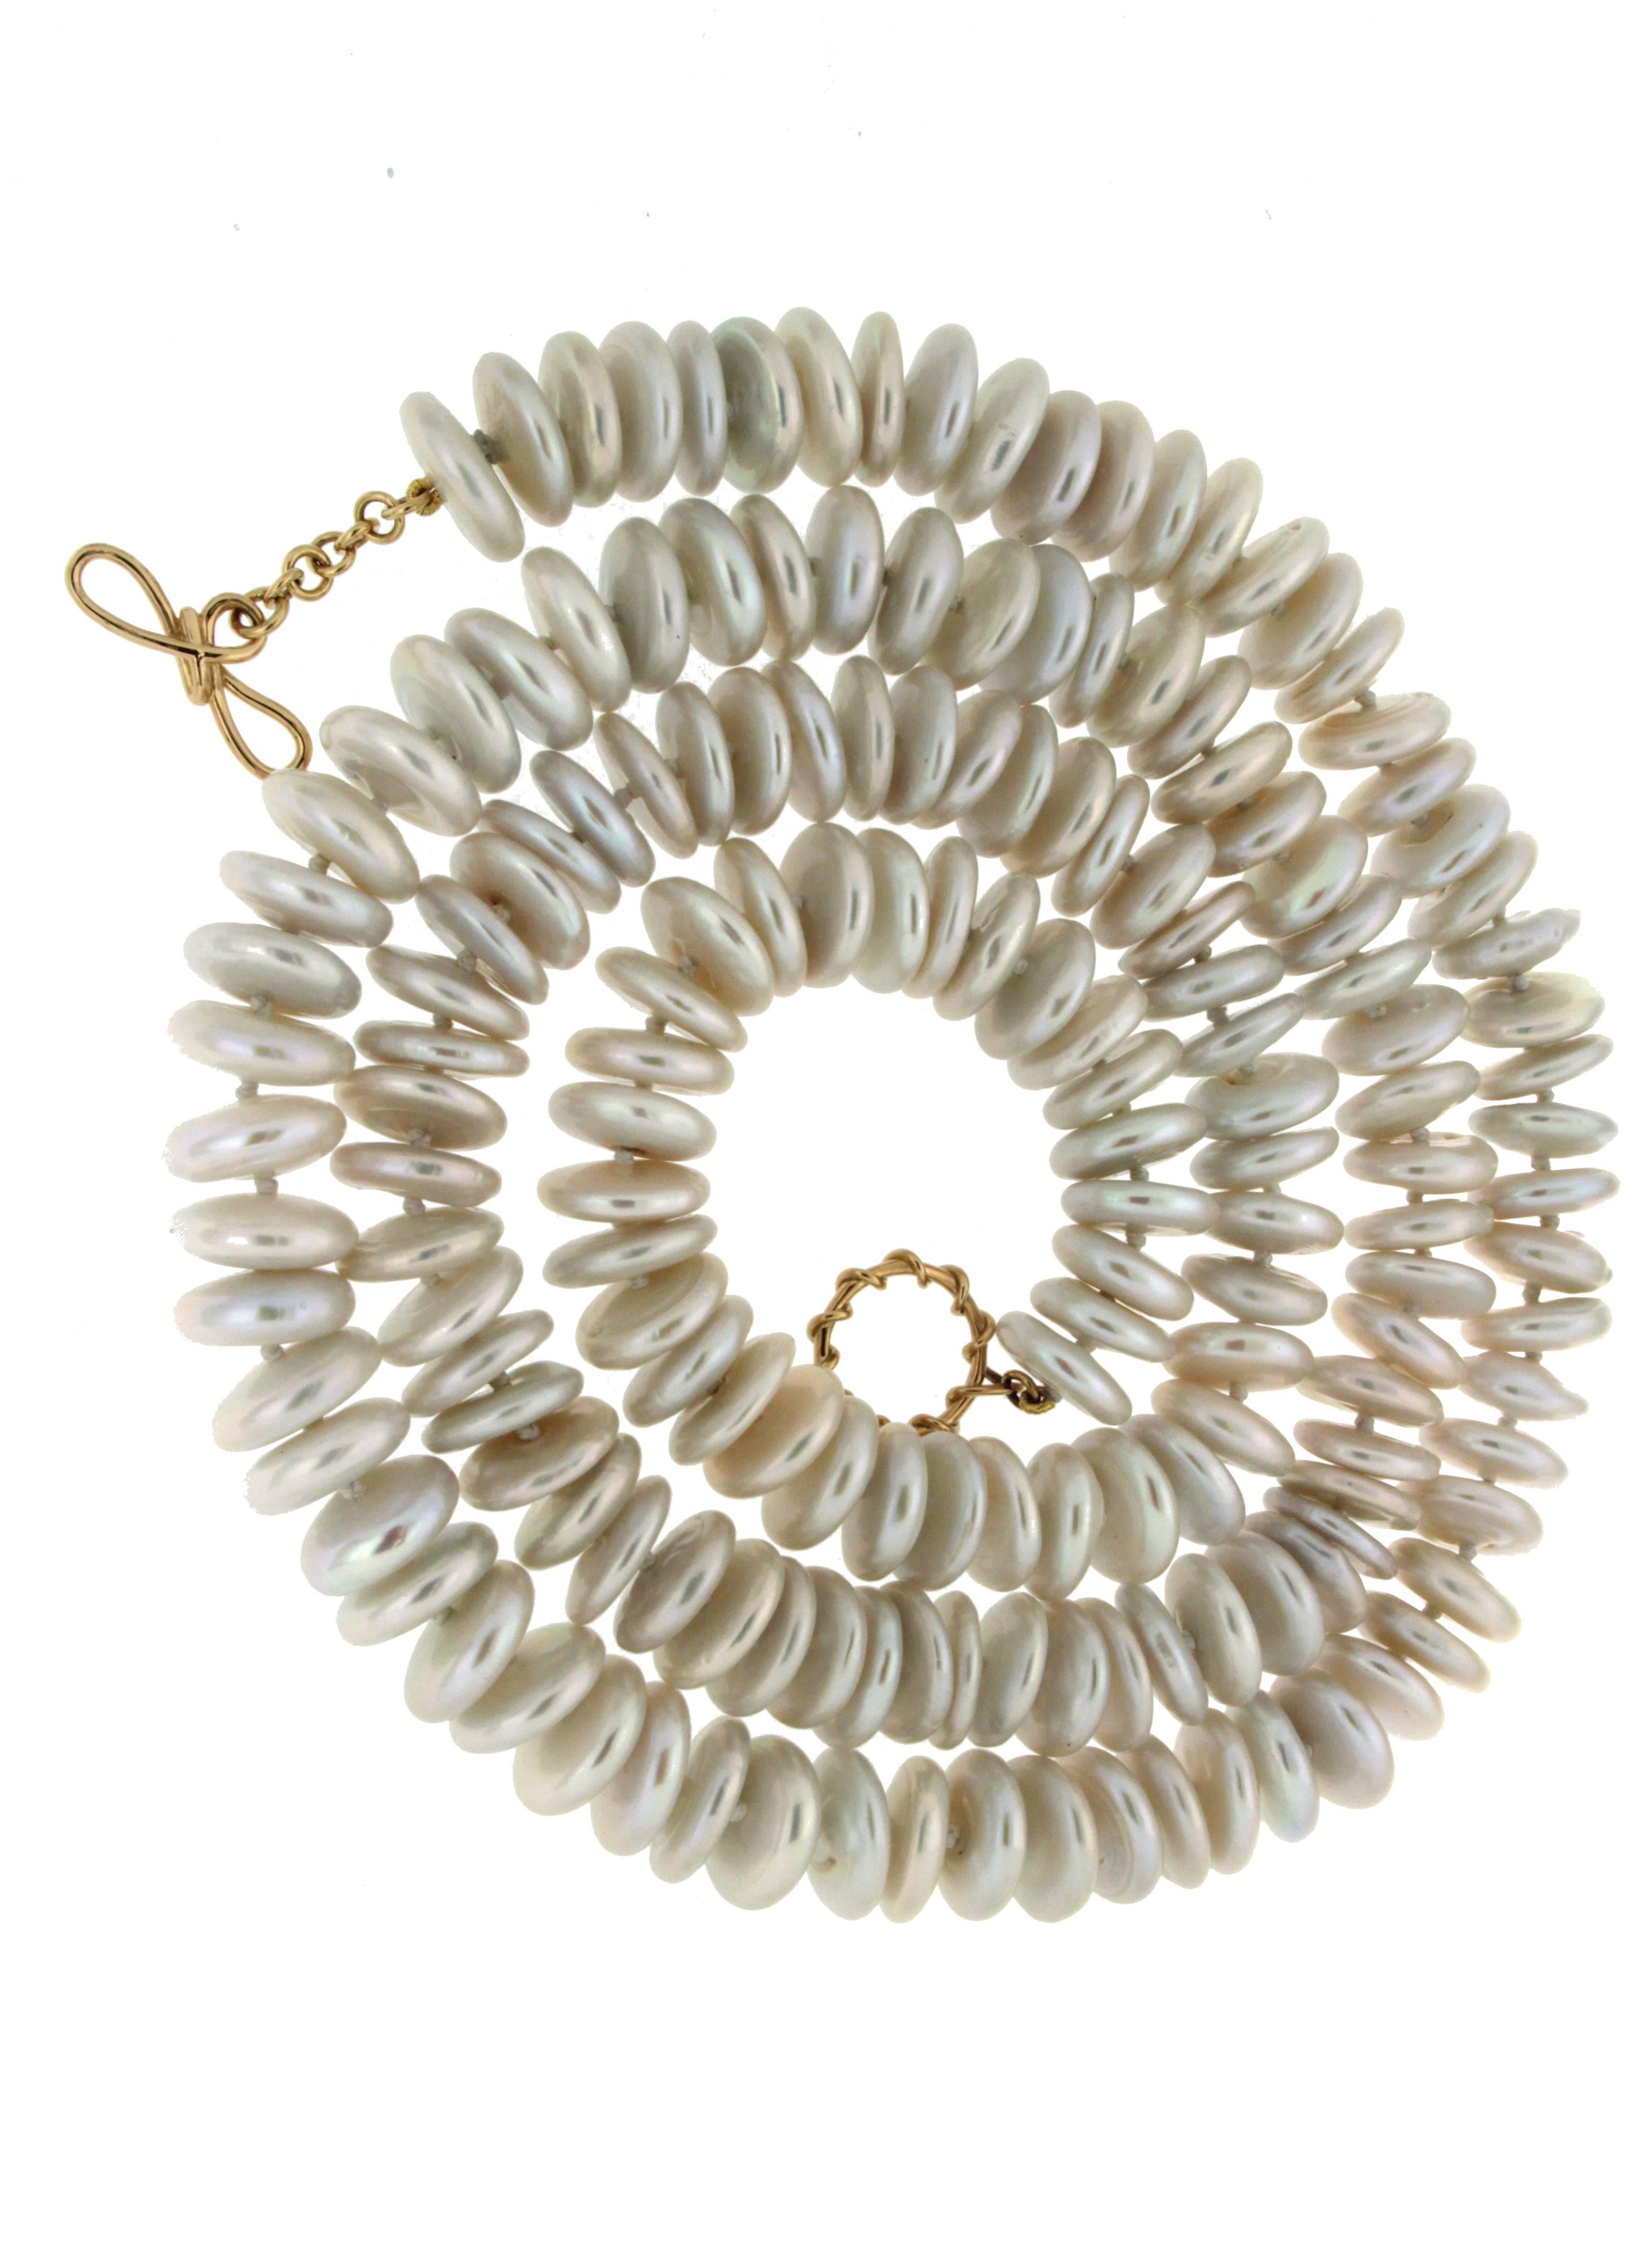 This necklace features a strand of fresh water baroque disk pearls, it is complete with an 18kt yellow ring and toggle clasp.

Valentin Magro is the artisan creating this interesting necklace. Having spent twenty-five years collaborating with the